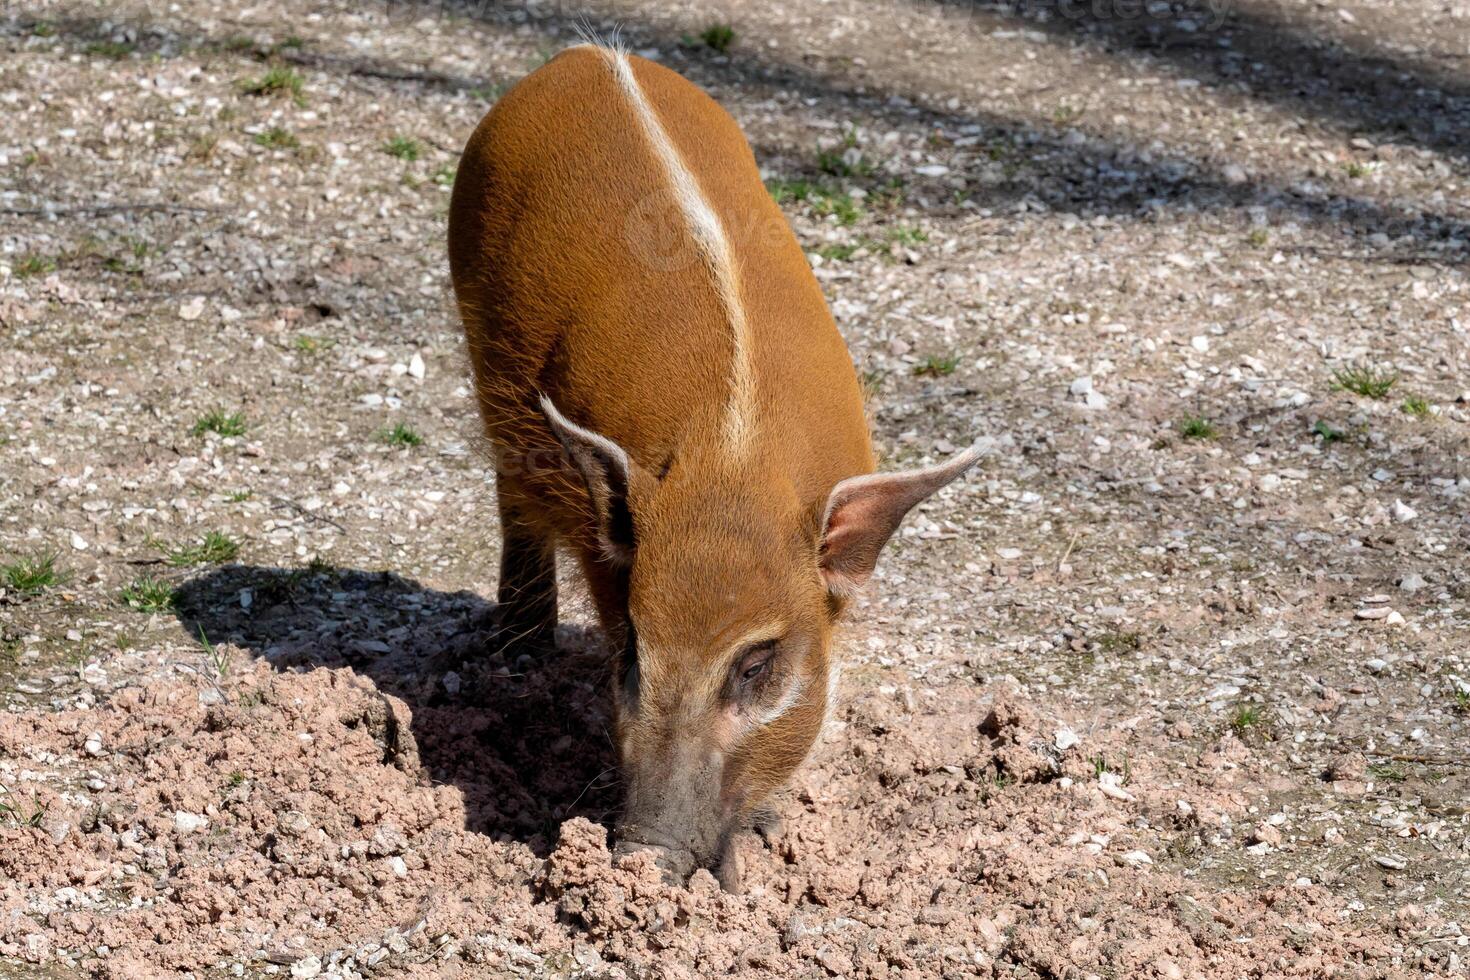 Red river hog, also known as the bush pig. photo